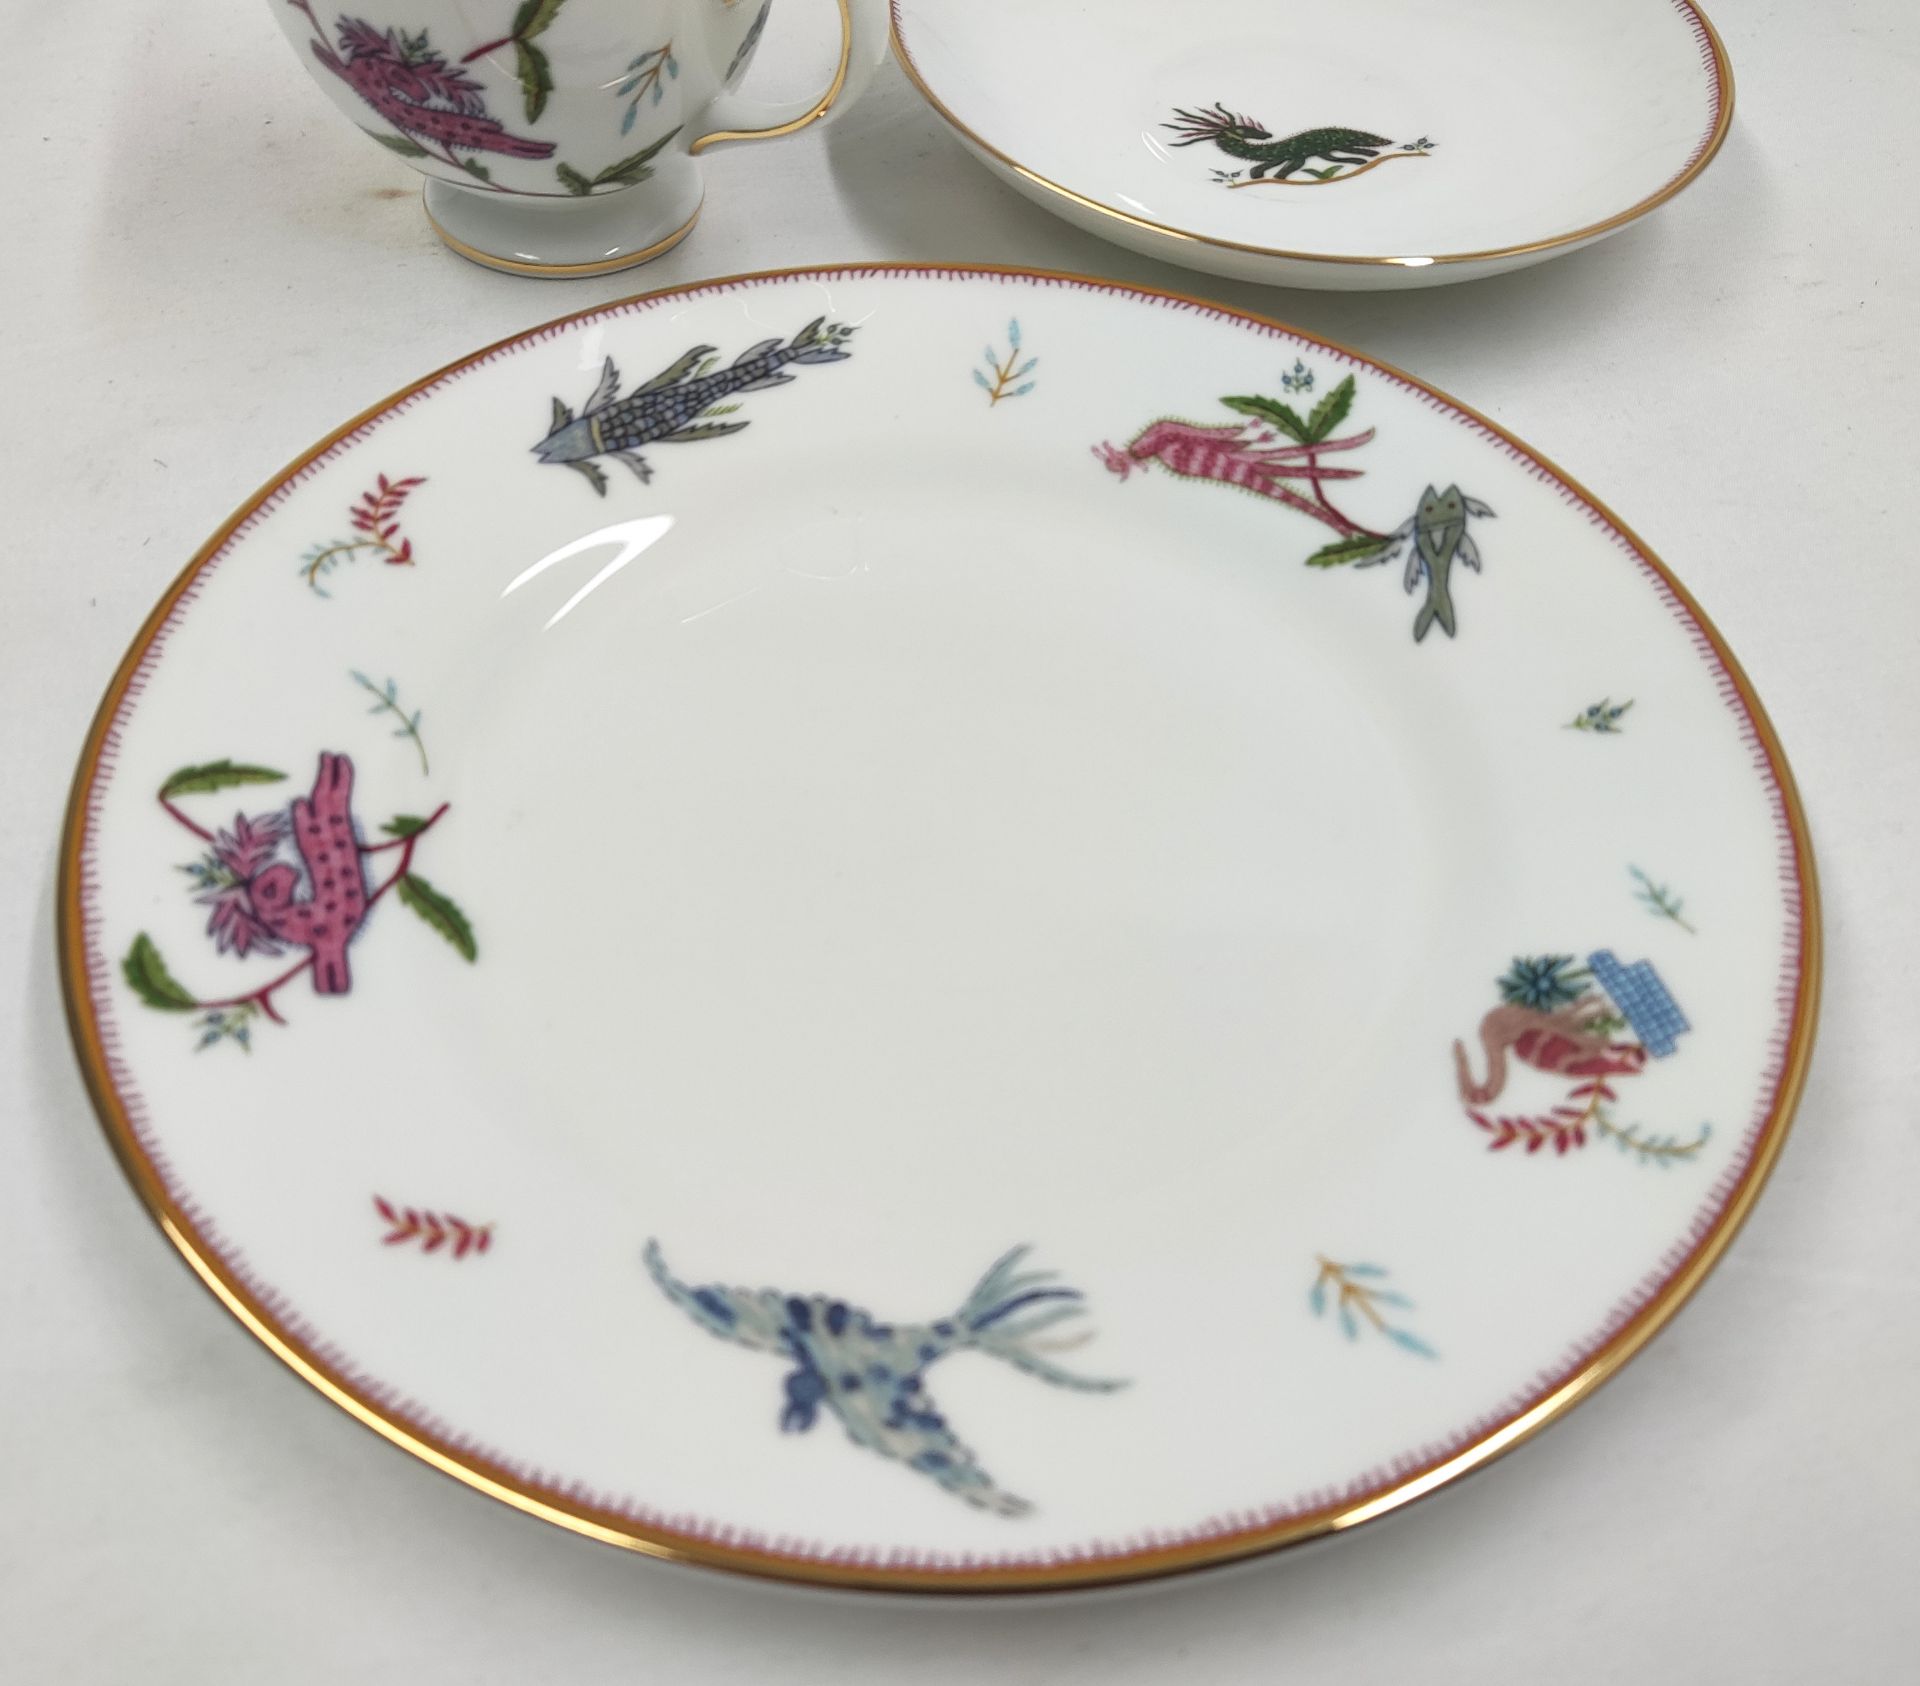 1 x WEDGWOOD Mythical Creatures Fine Bone China Teacup/Saucer/Plate Set - New/Boxed - RRP £140.00 - Bild 5 aus 20